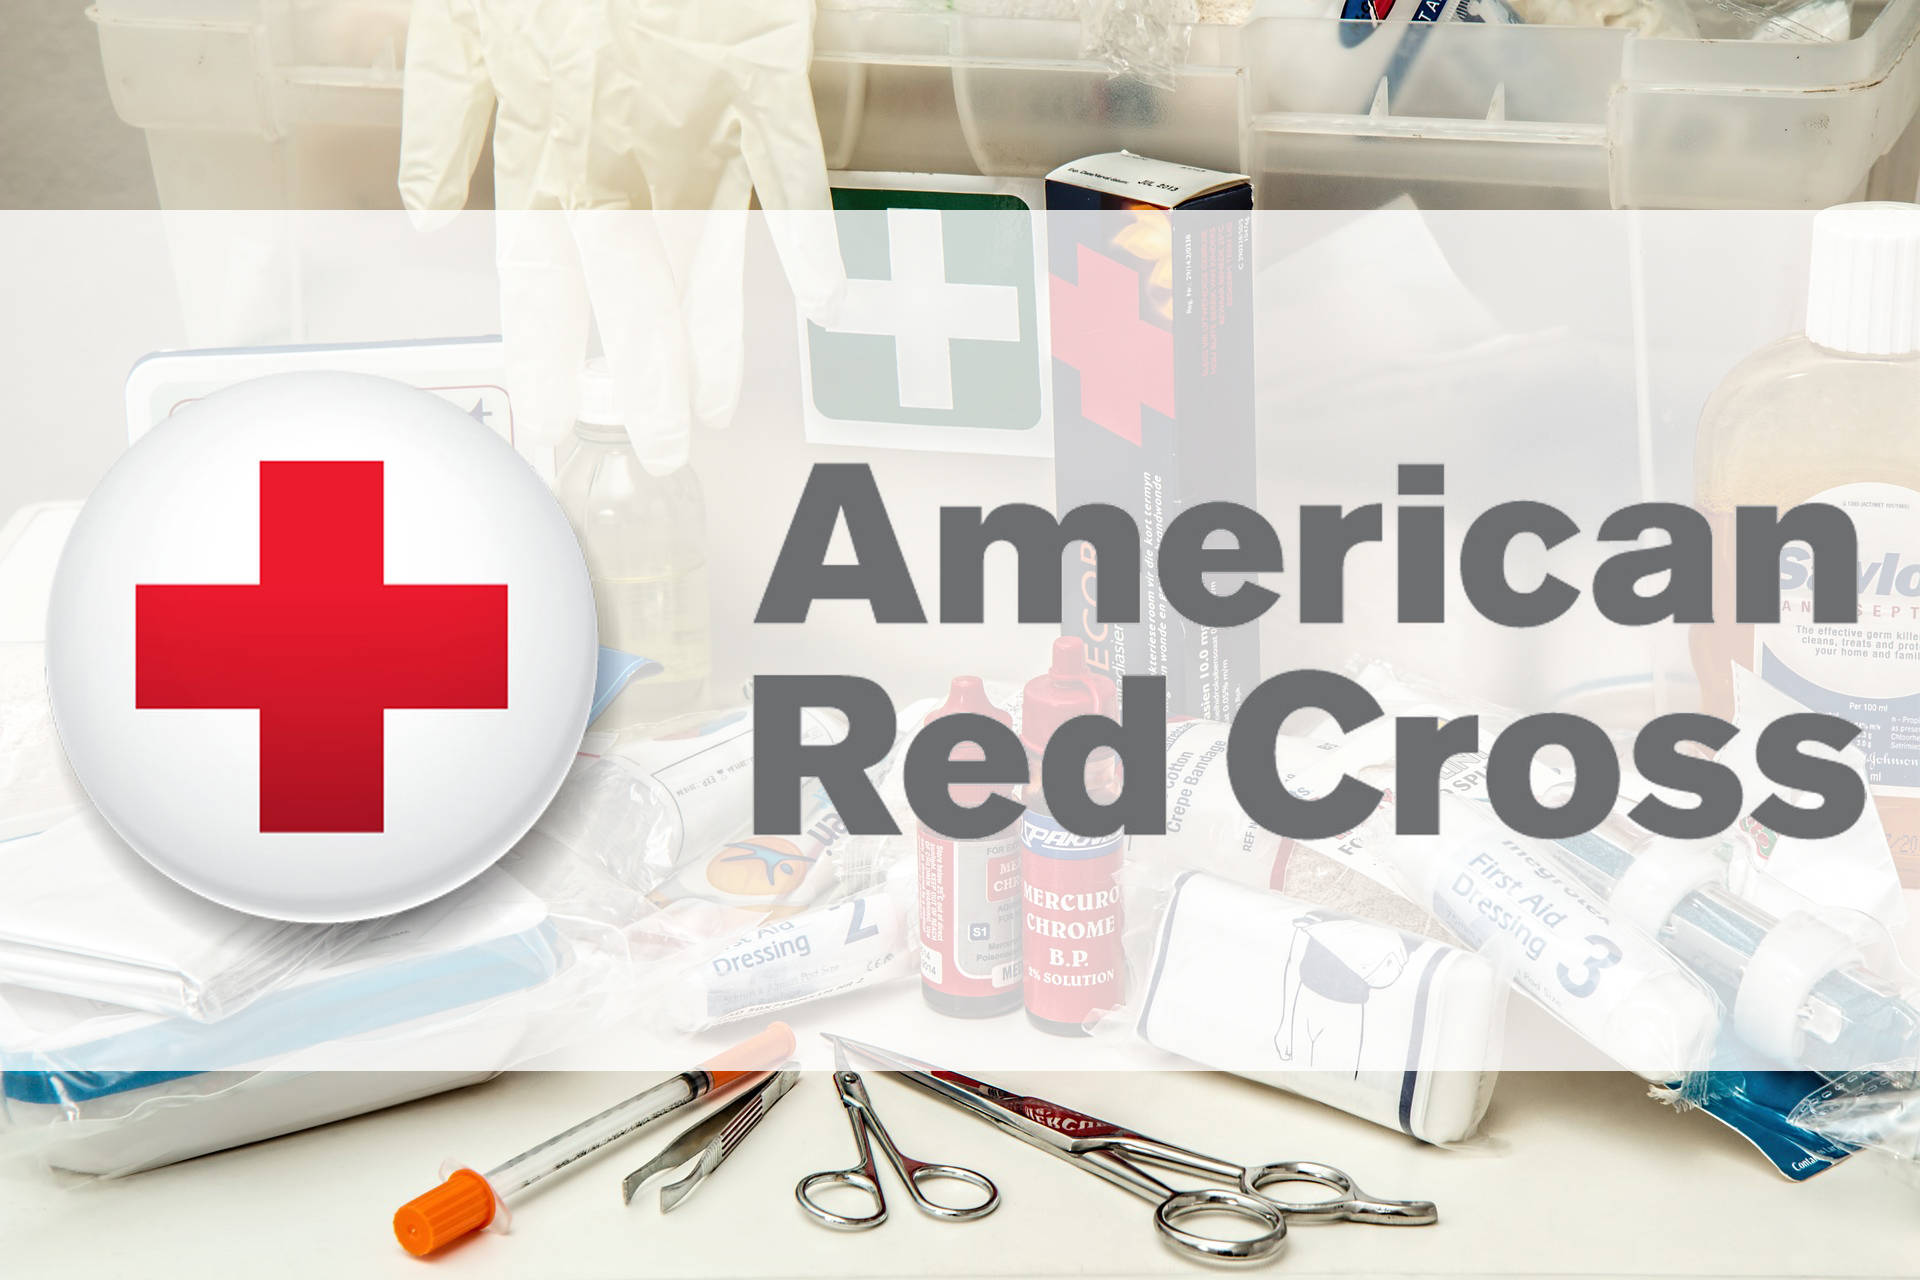 American Red Cross information session